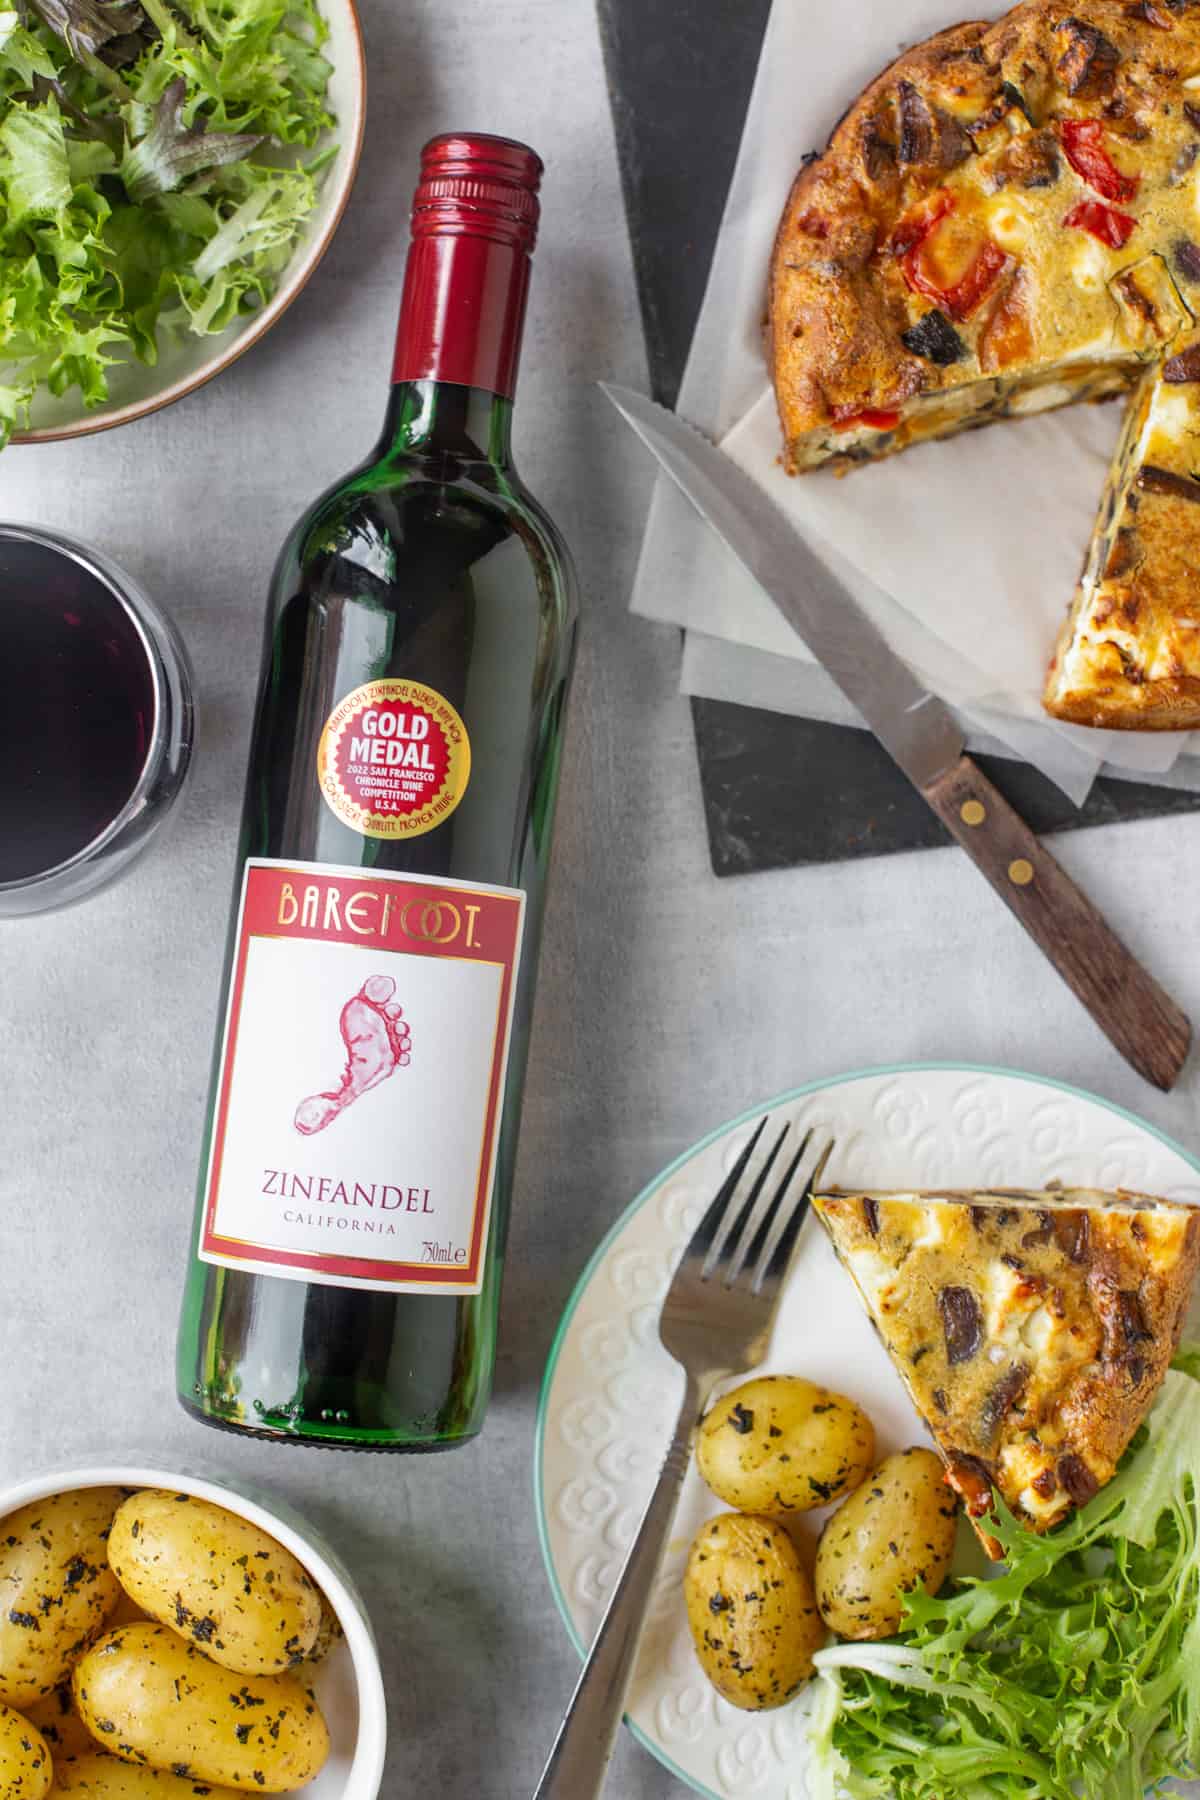 Barefoot wine laid on a table with crustless quiche.